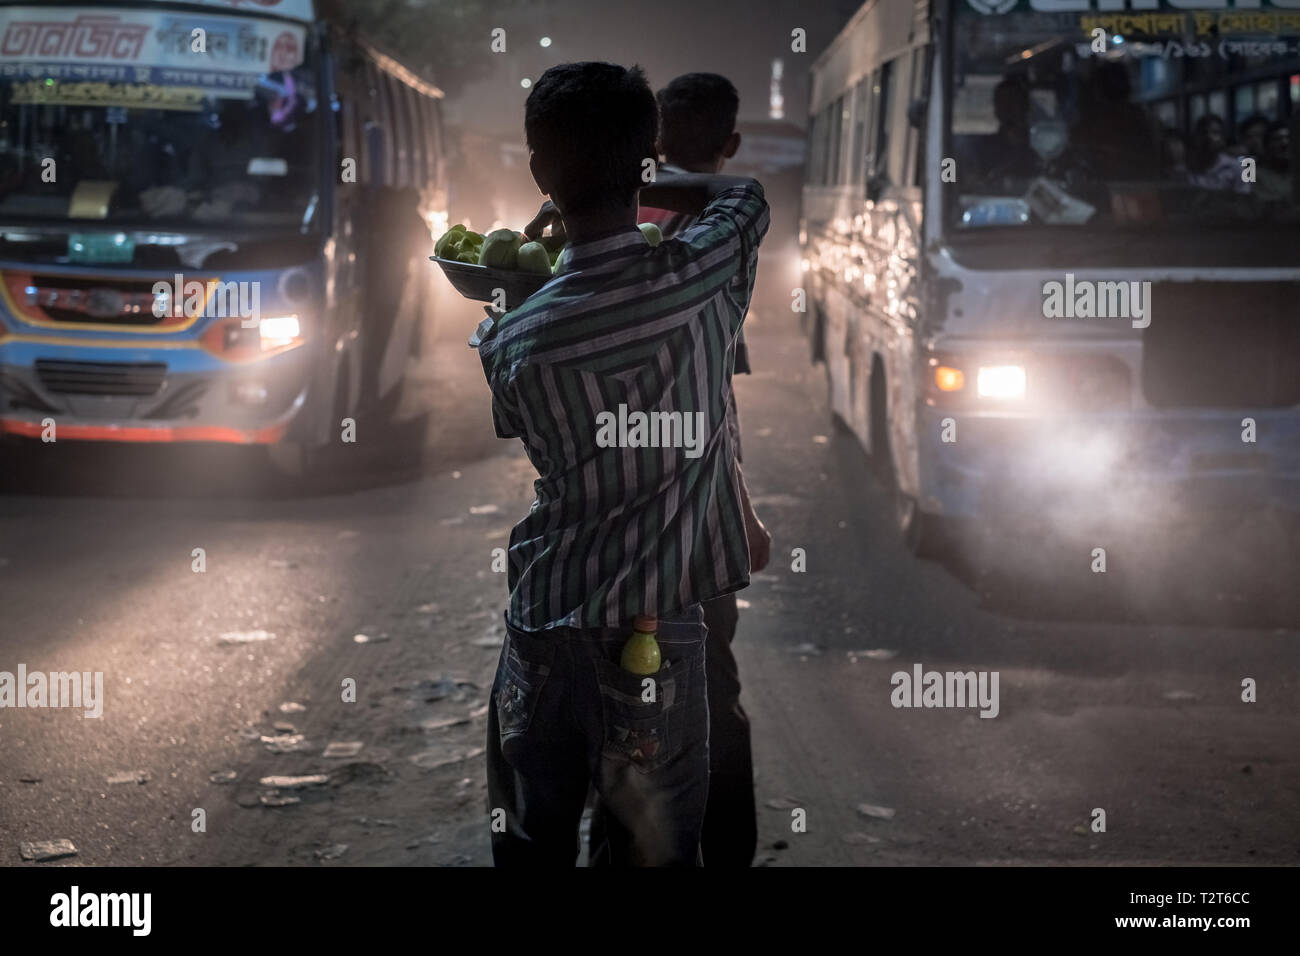 Street vendor selling vegetables in traffic jam in Dhaka, Bangladesh. Smog and air pollution is visible there day and night. Many buses around. Stock Photo